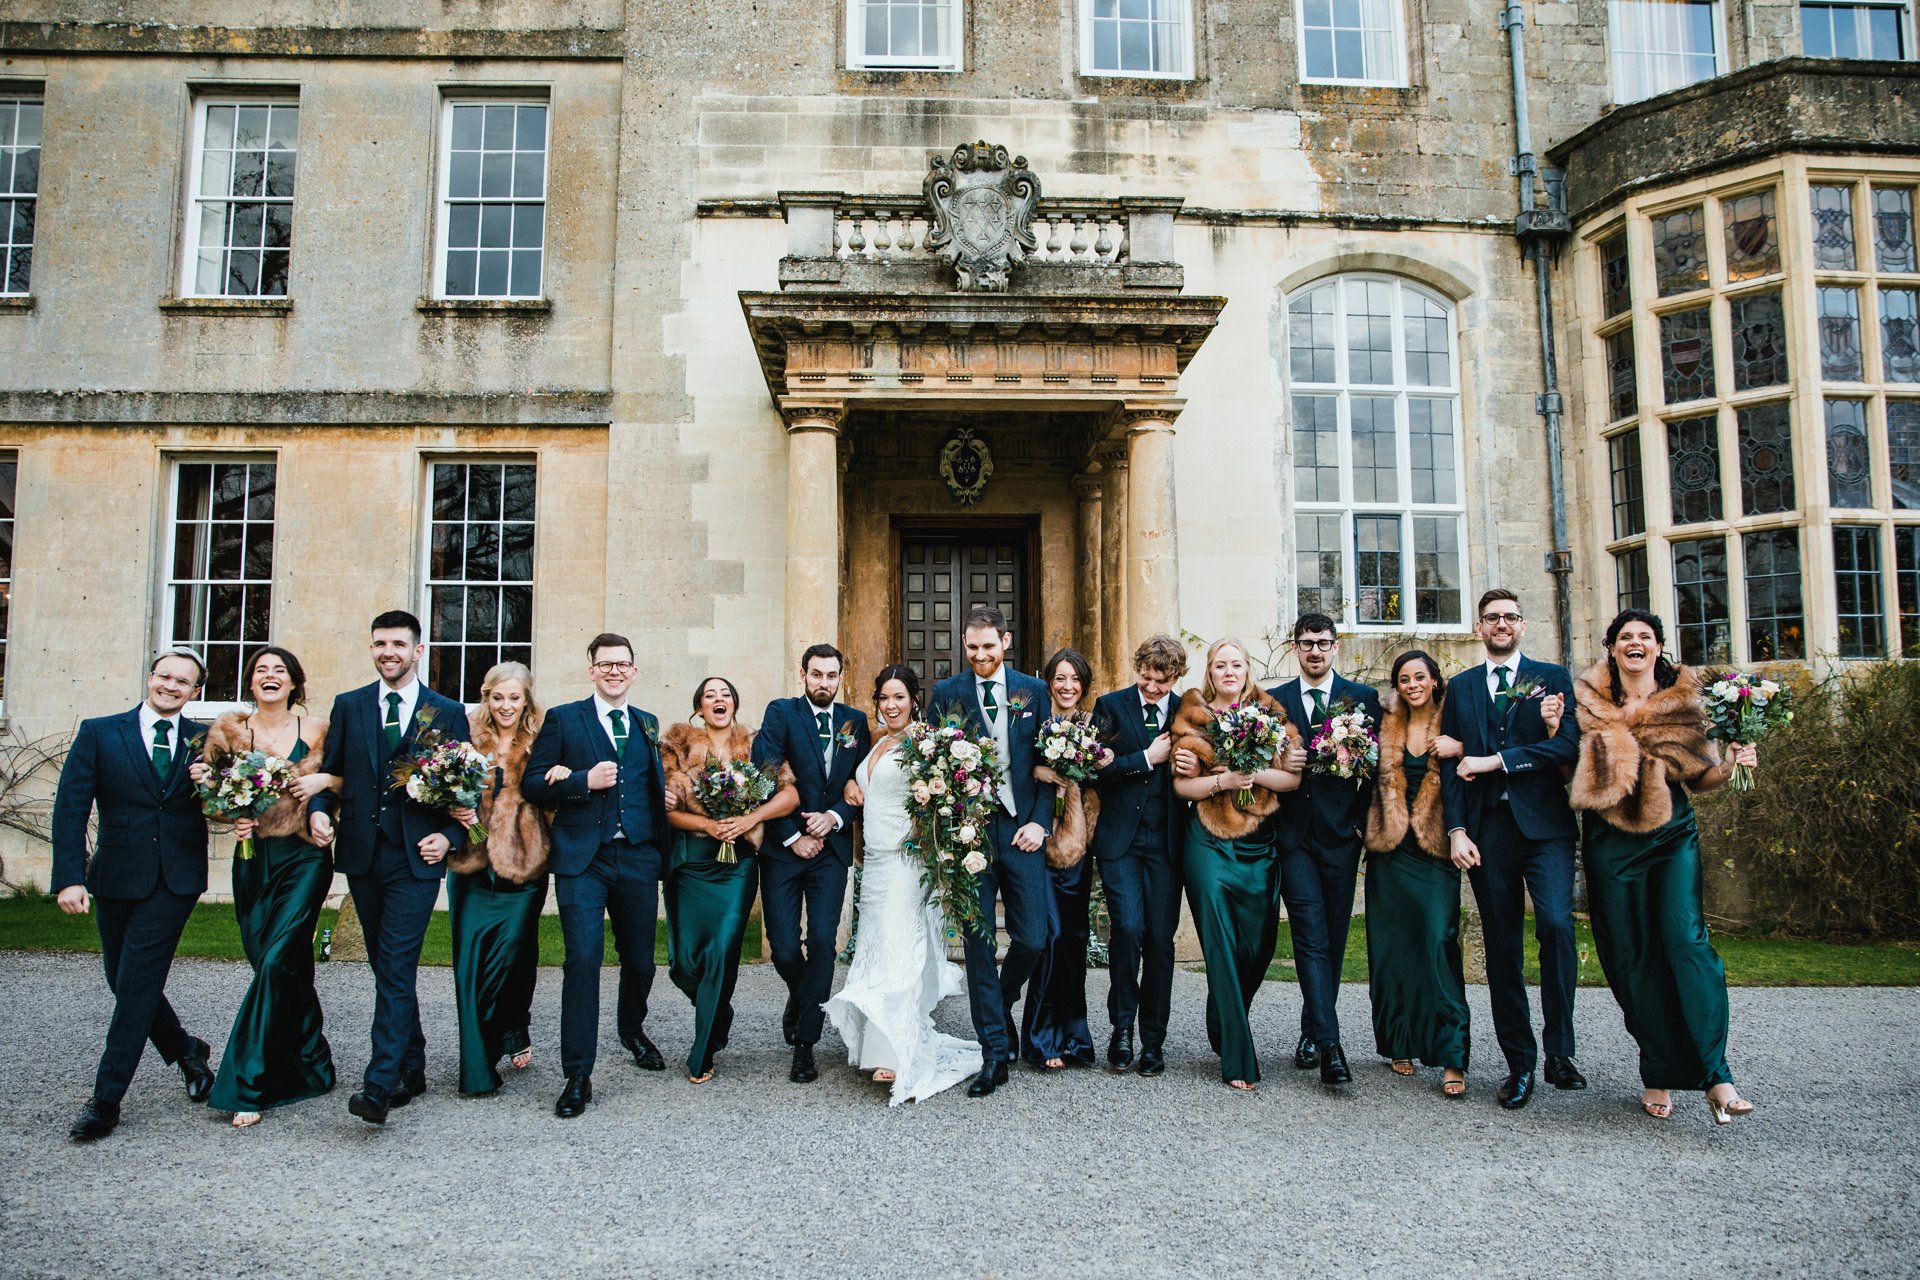 Big wedding Bridal party and groomsmen link arms and laugh in front of their weekend wedding venue